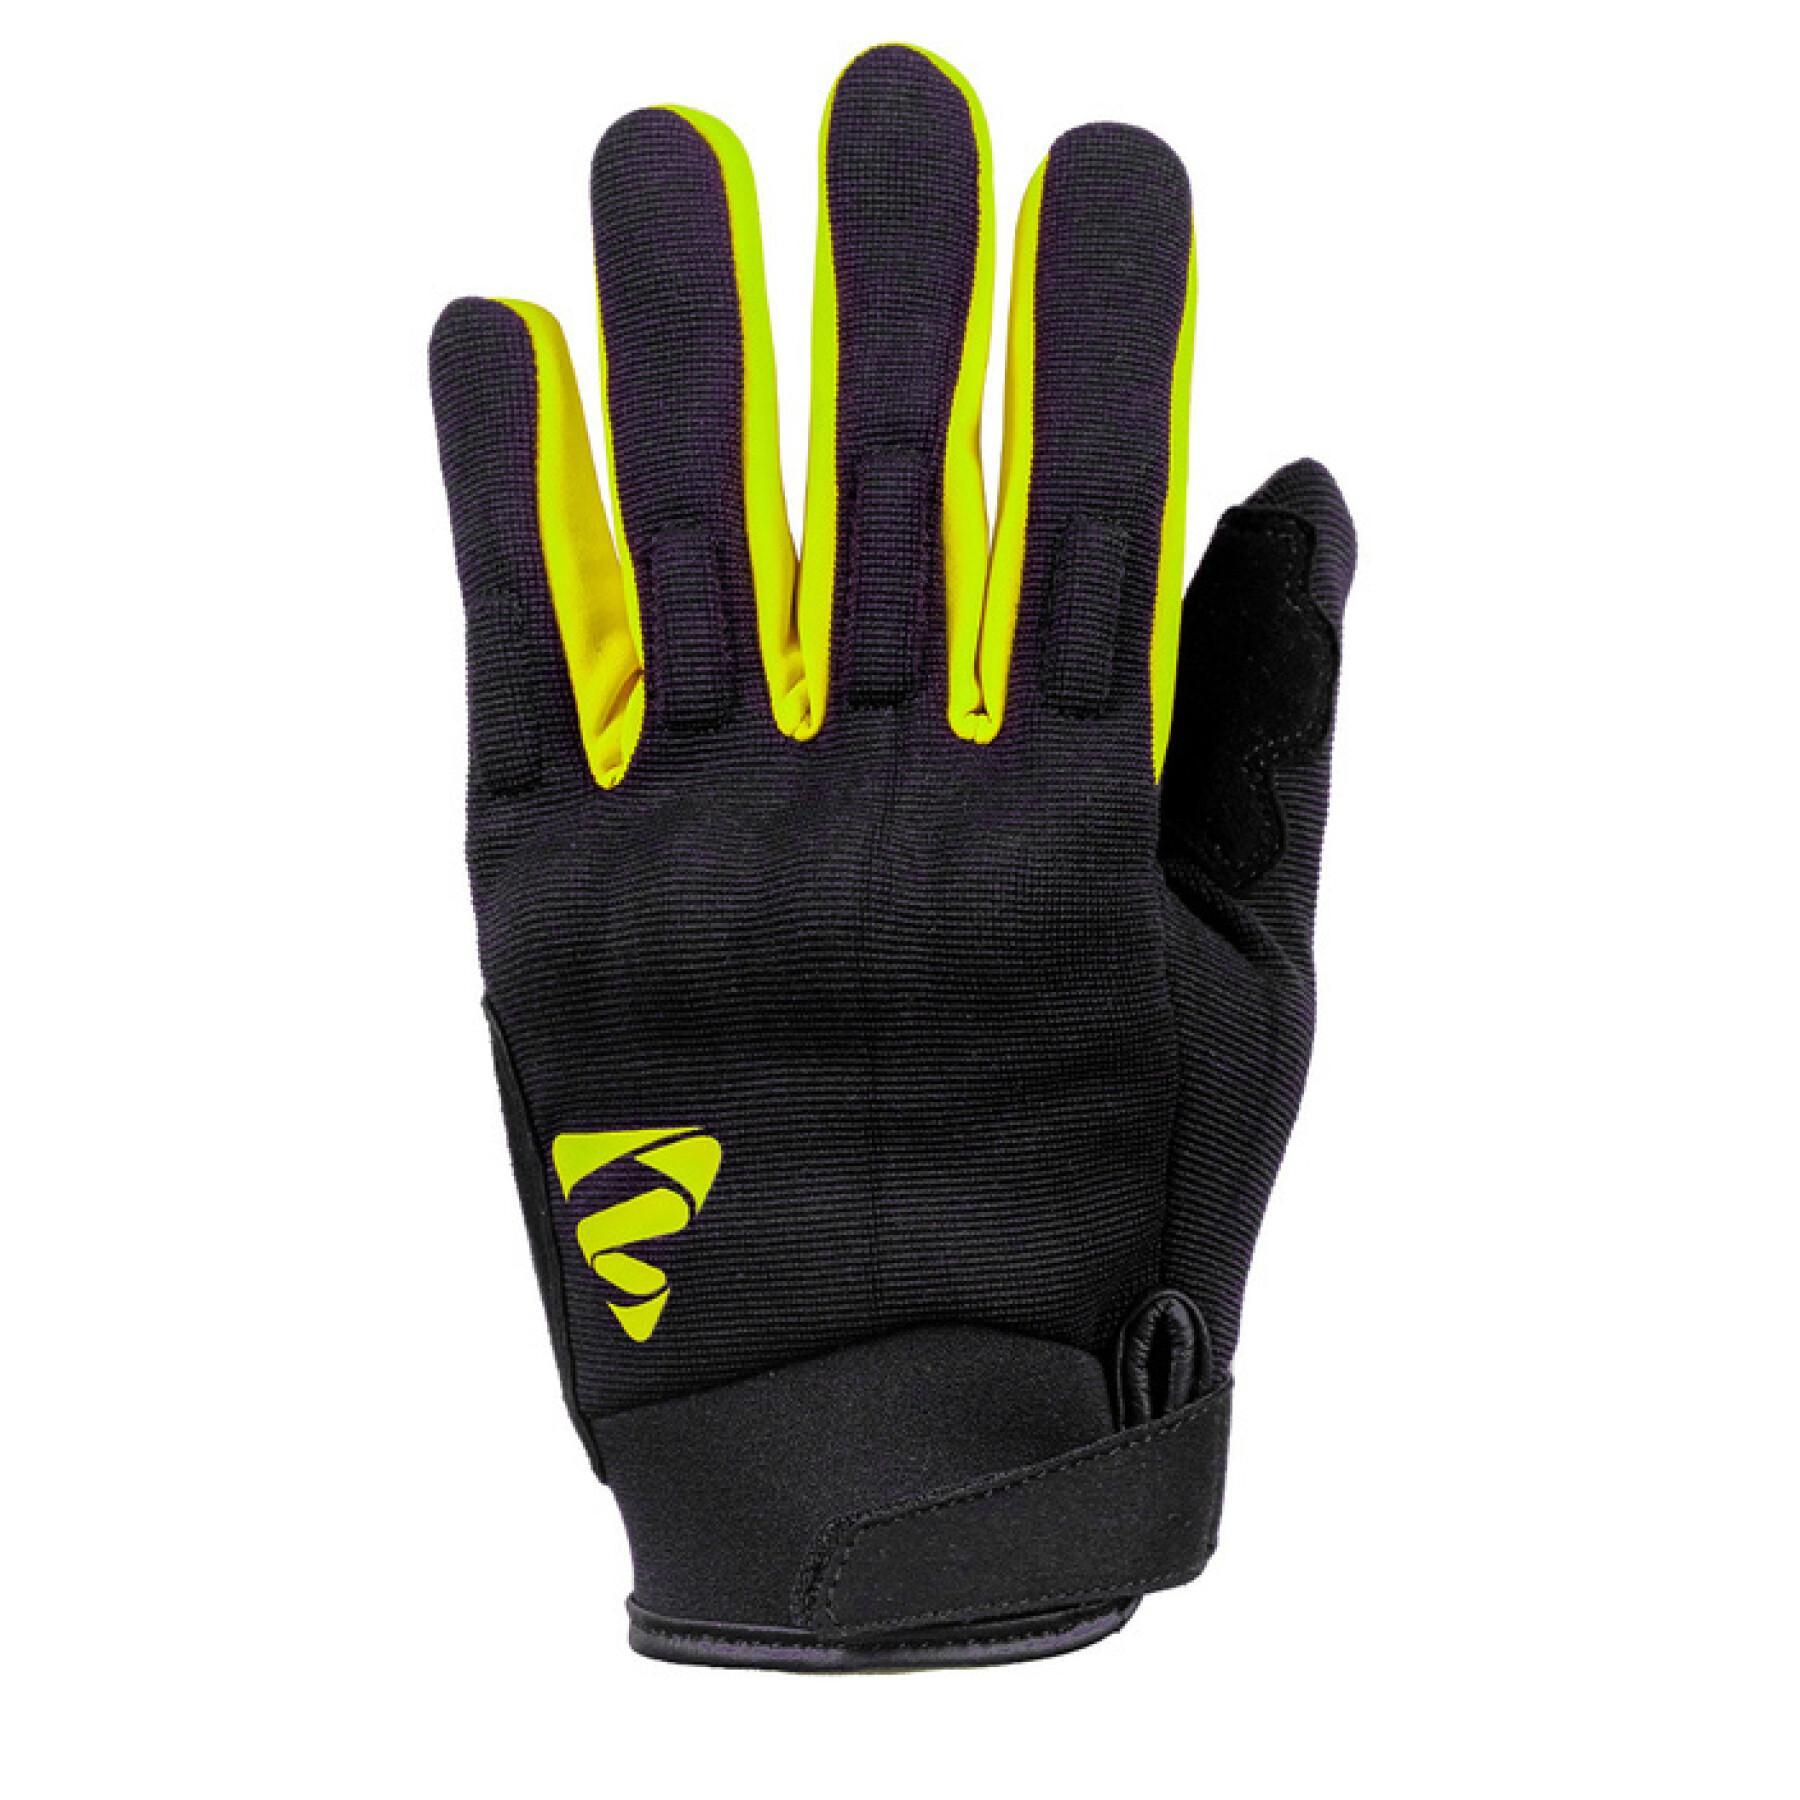 Motorcycle racing gloves GMS Rio